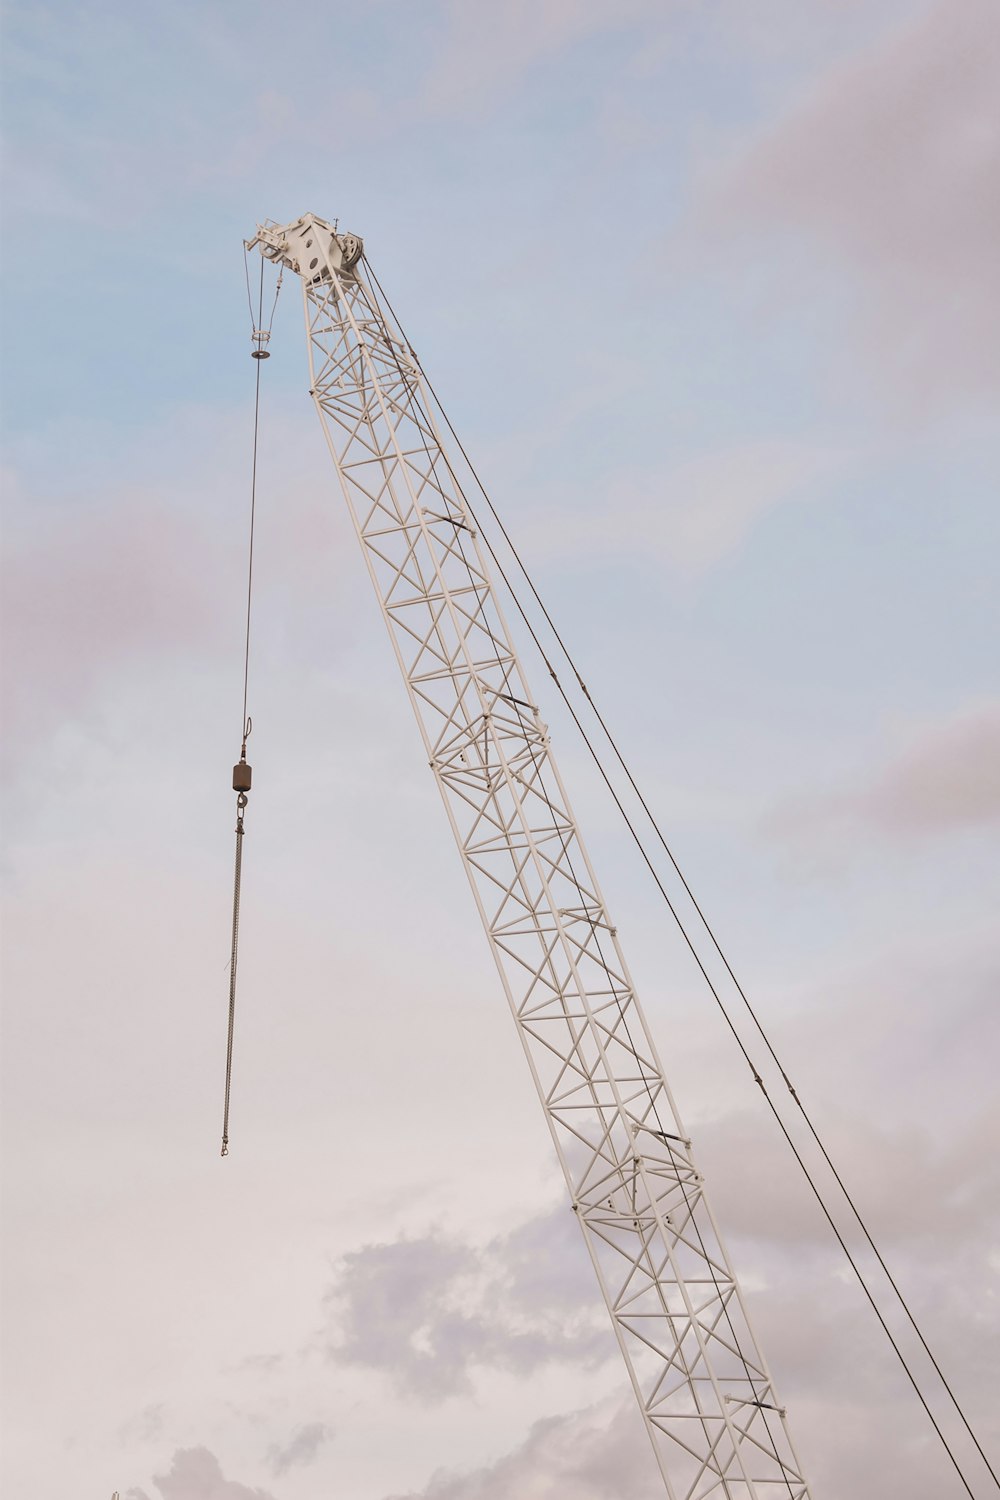 red crane under cloudy sky during daytime